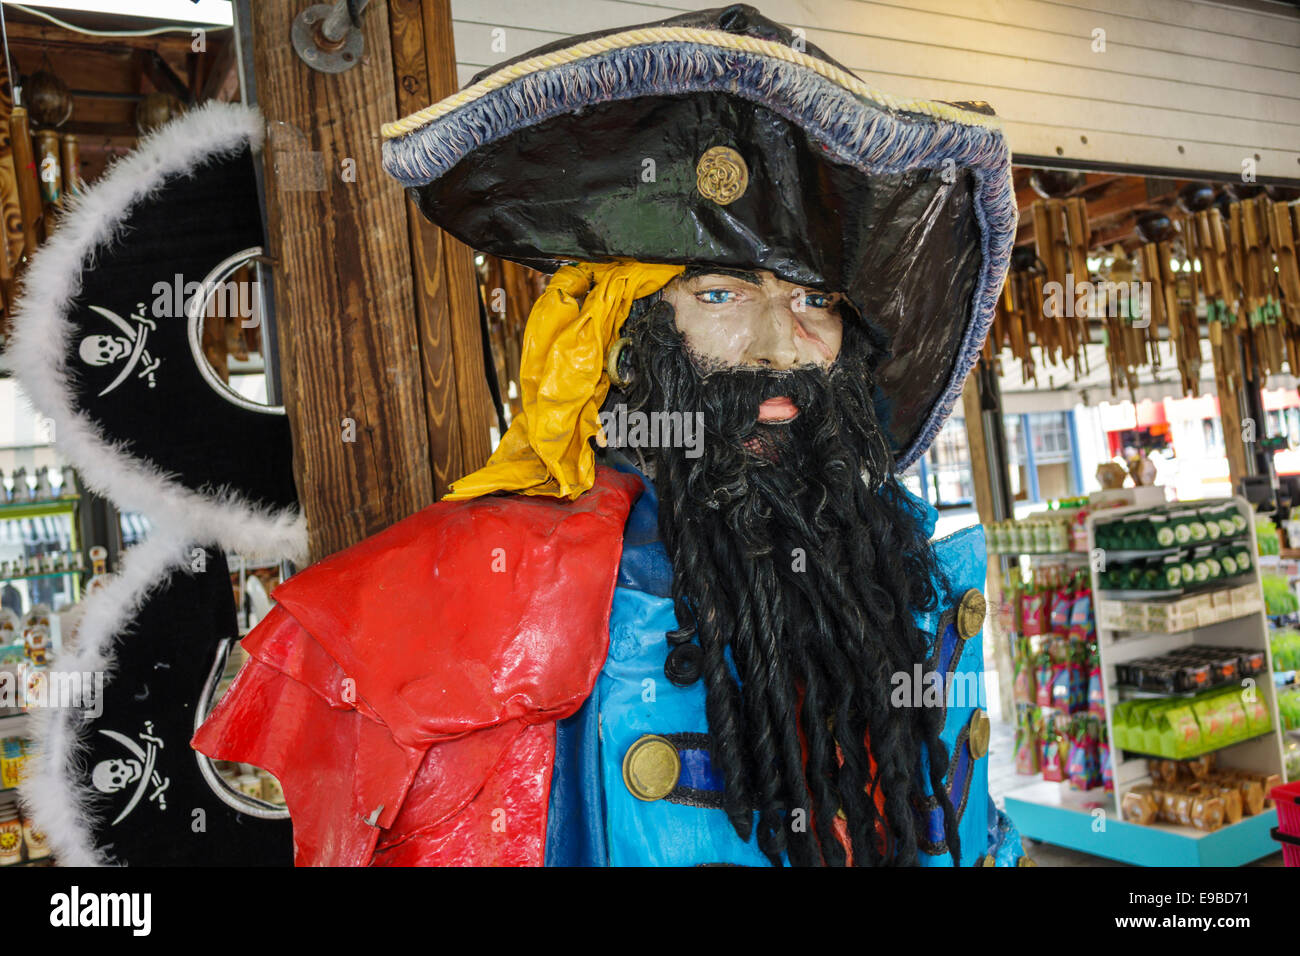 Key West Florida,Keys Mallory Square,souvenirs,humor,humorous,humour,pirate face,product products display sale,brands,sale,shopping shopper shoppers s Stock Photo